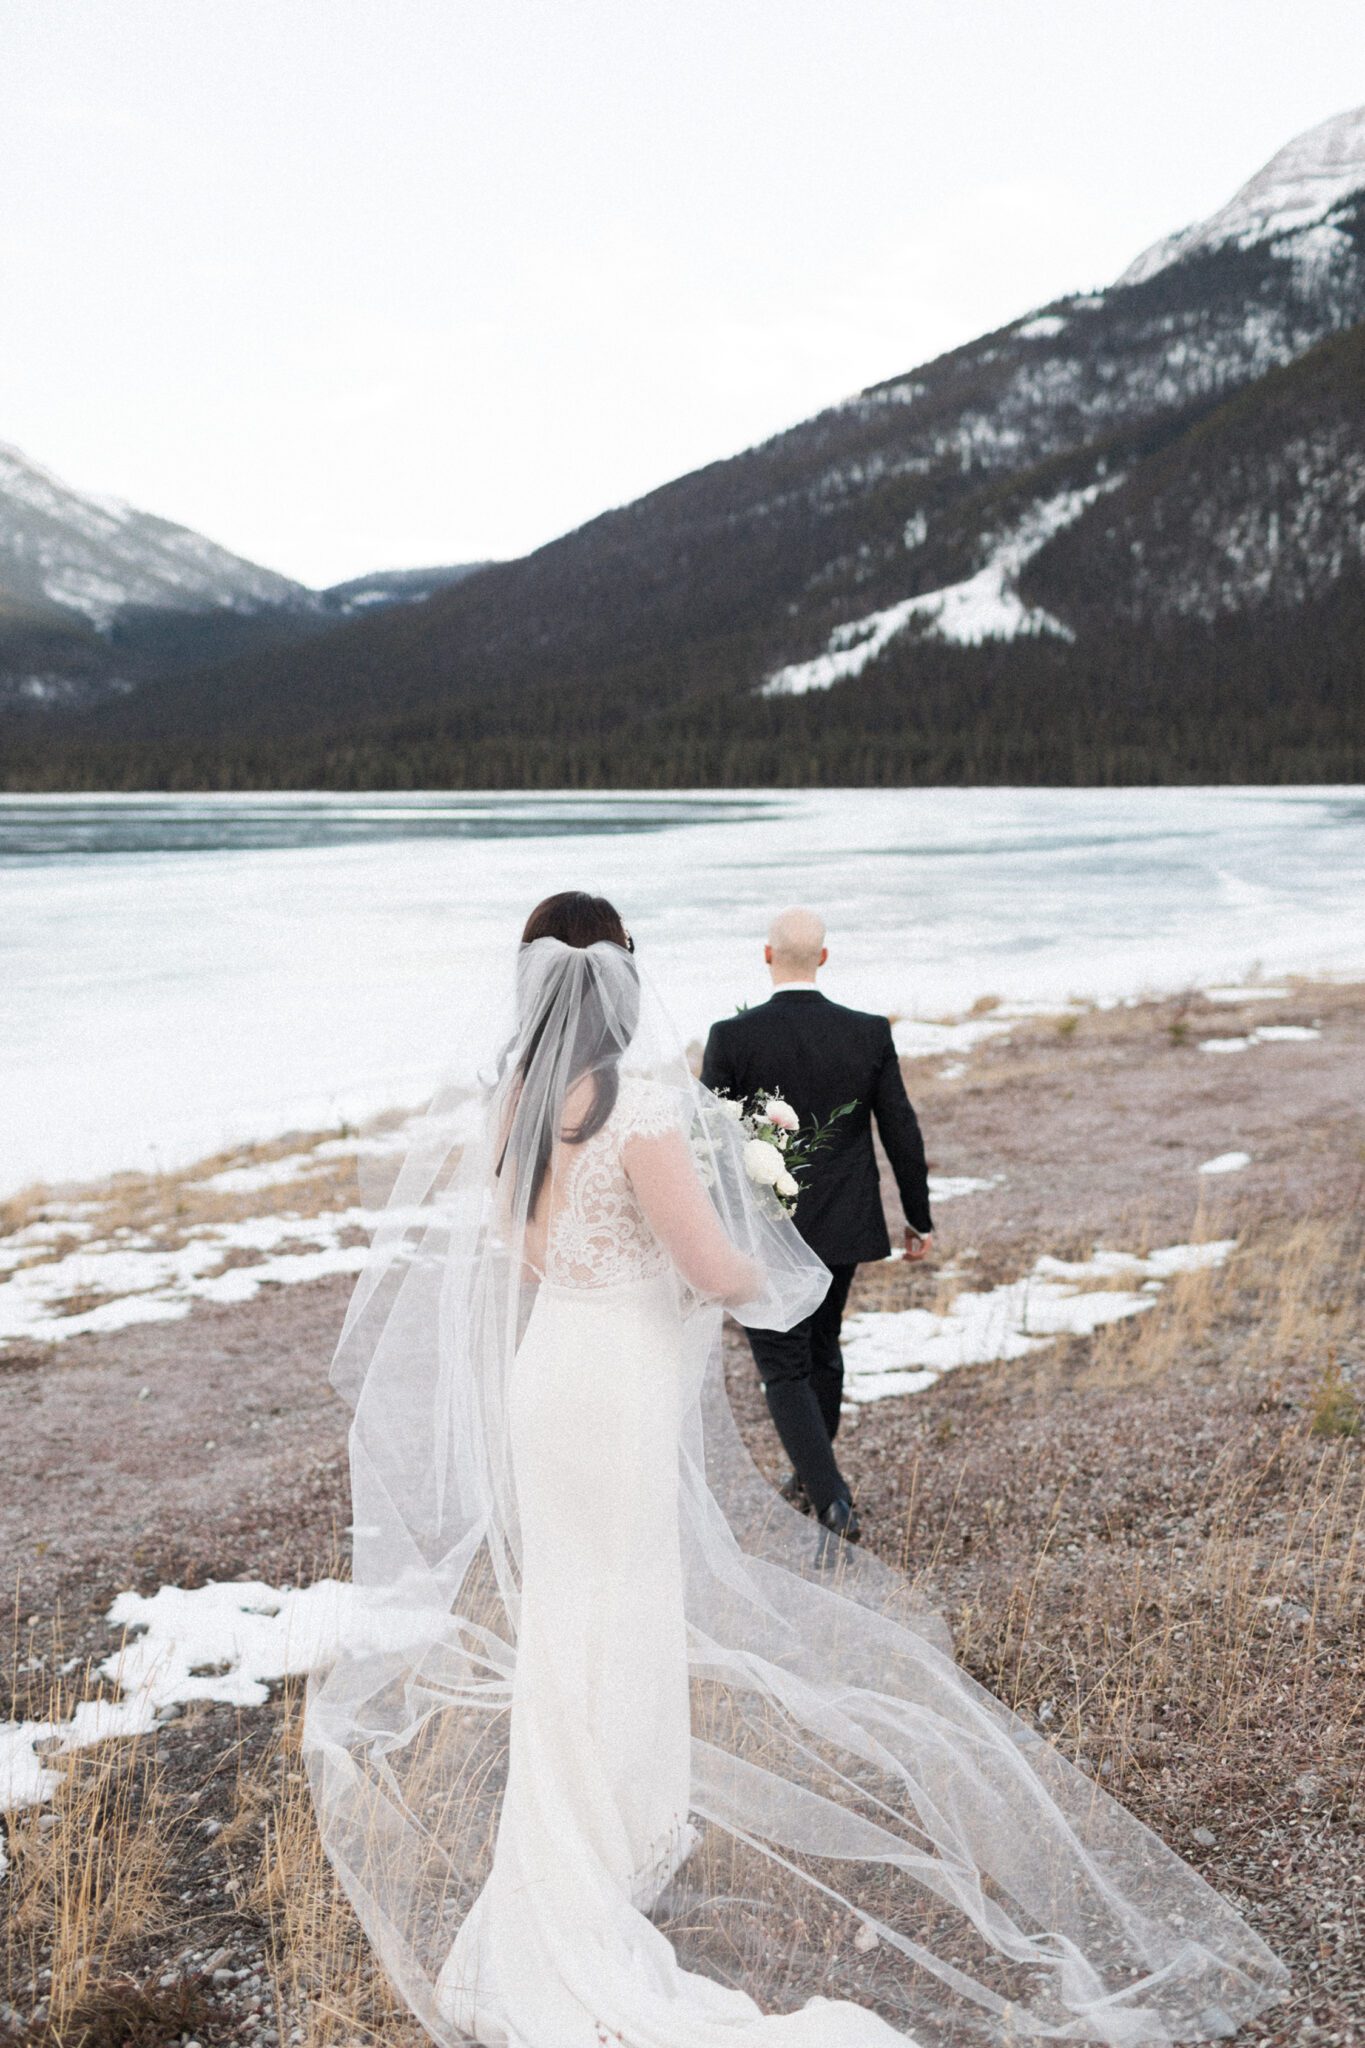 Couple walking down to the water with a stunning mountain backdrop and lake view, winter wedding inspiration. 